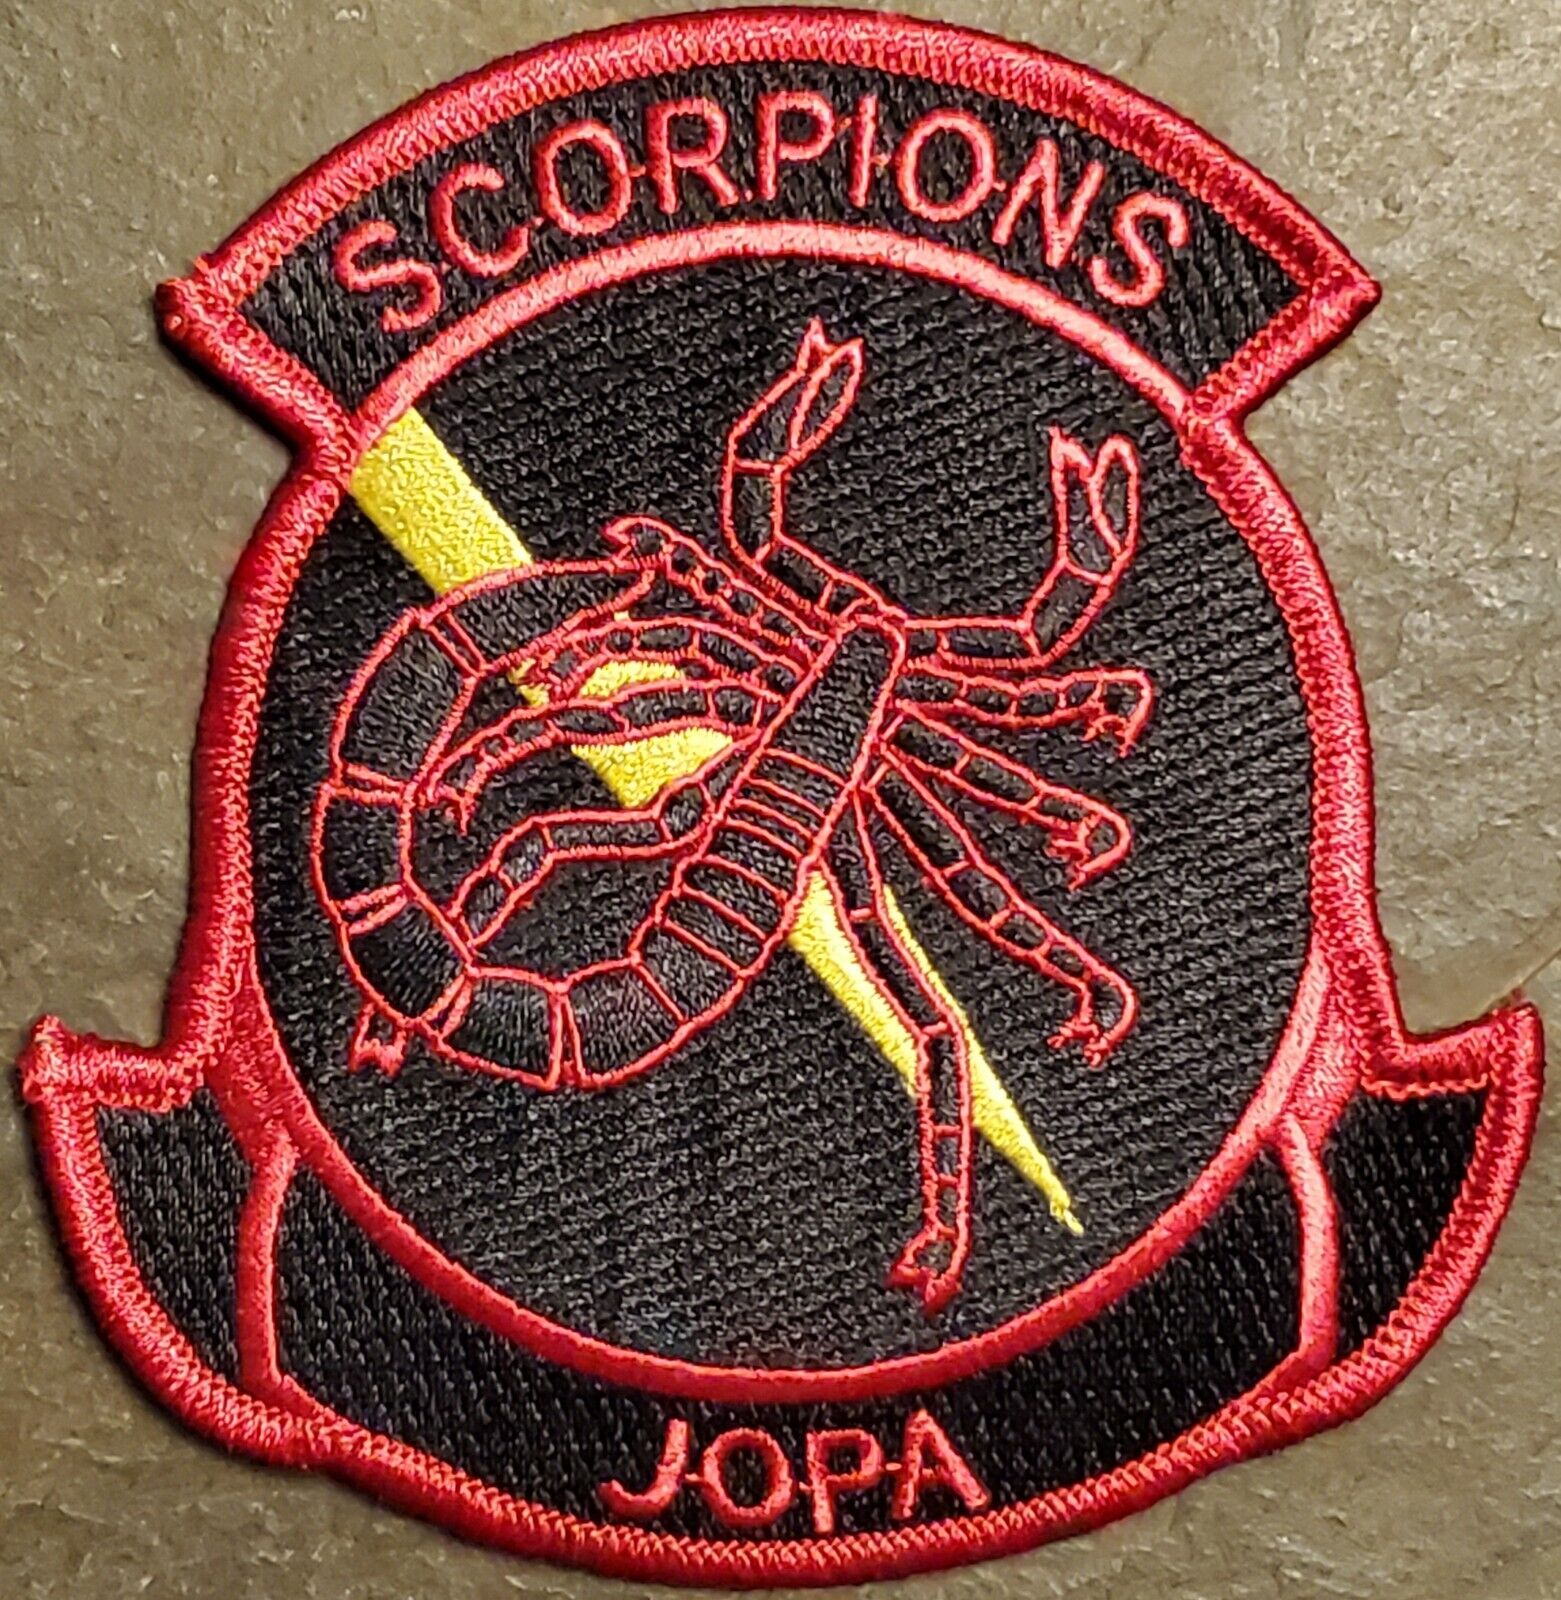 USN NAVY PATCH VAQ-132 SQUADRON SCORPIONS JOPA NAS WHIDBEY ISLAND COLOR FLIGHT